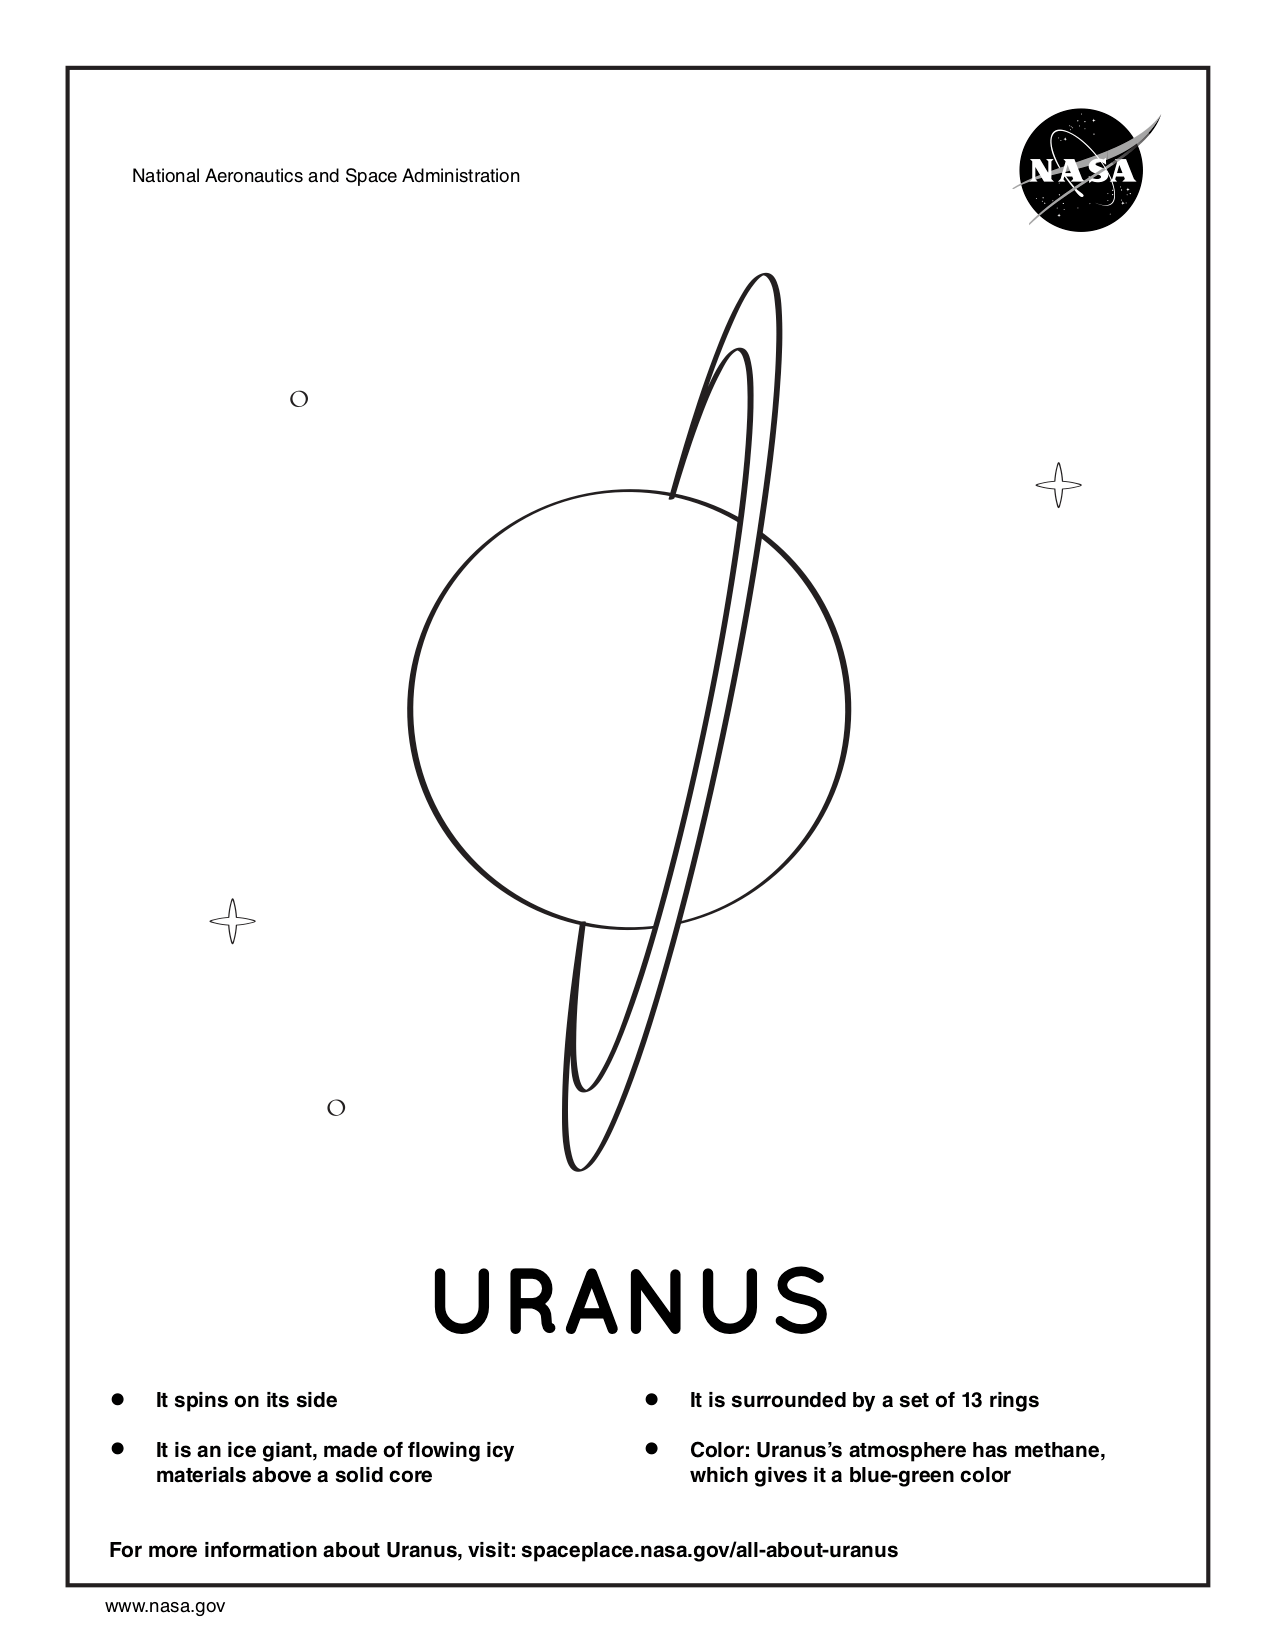 Coloring page for Uranus.